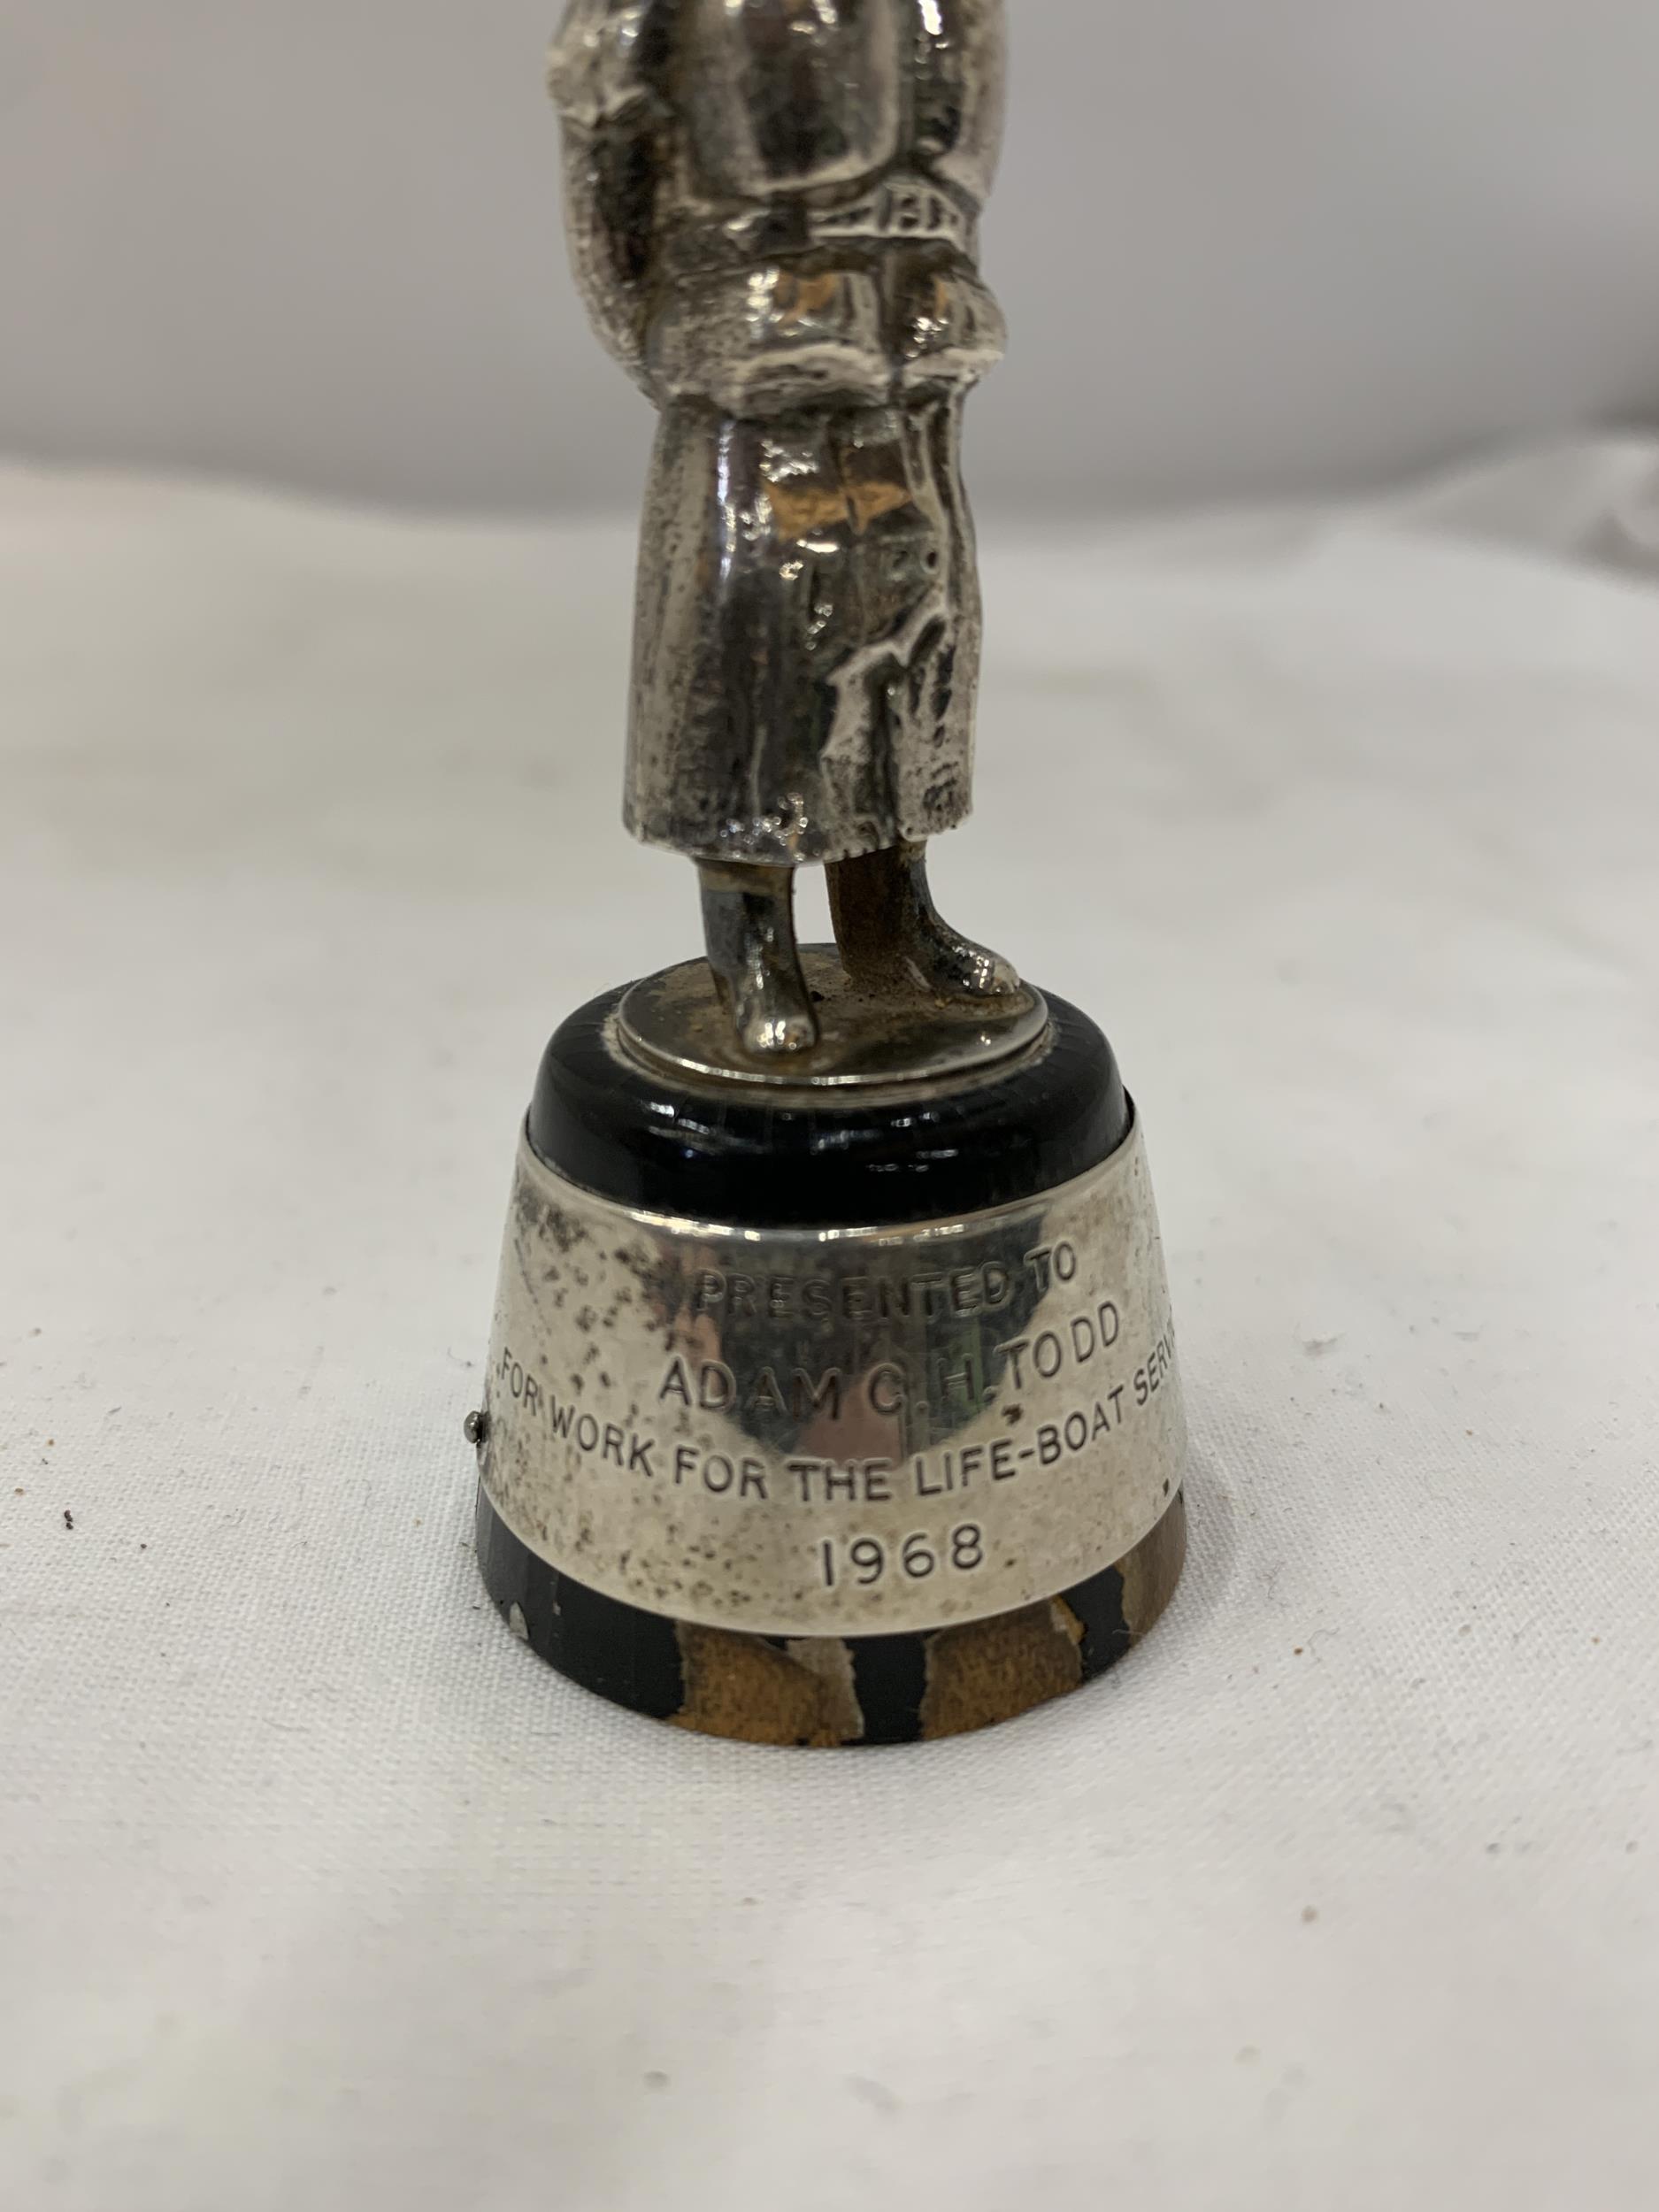 A SILVER R. N. L. I. PRESENTATION FIGURE, HEIGHT 8.5CM - Image 2 of 5